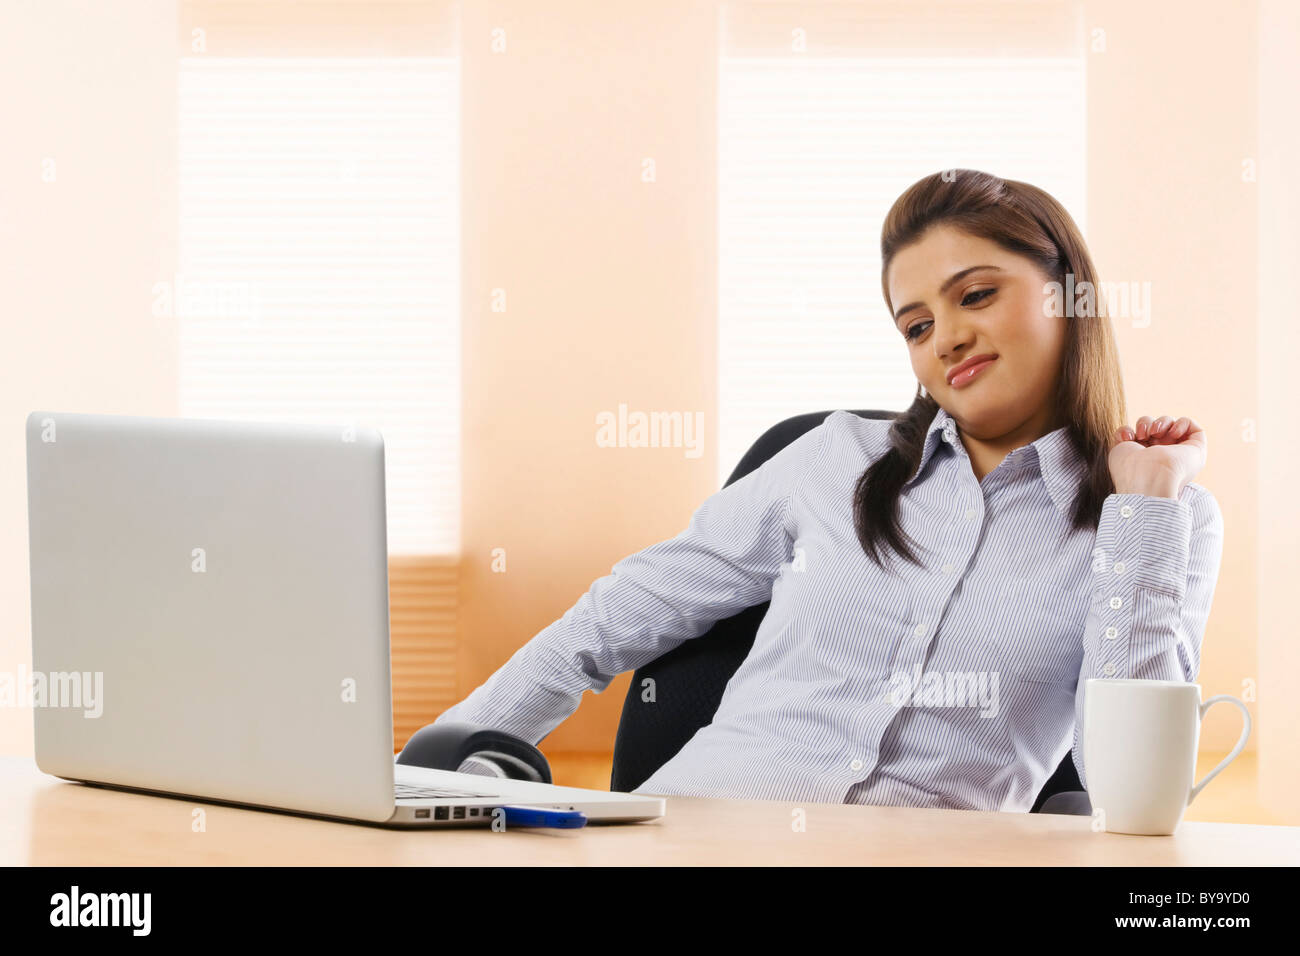 Businesswoman feeling lazy at work Stock Photo